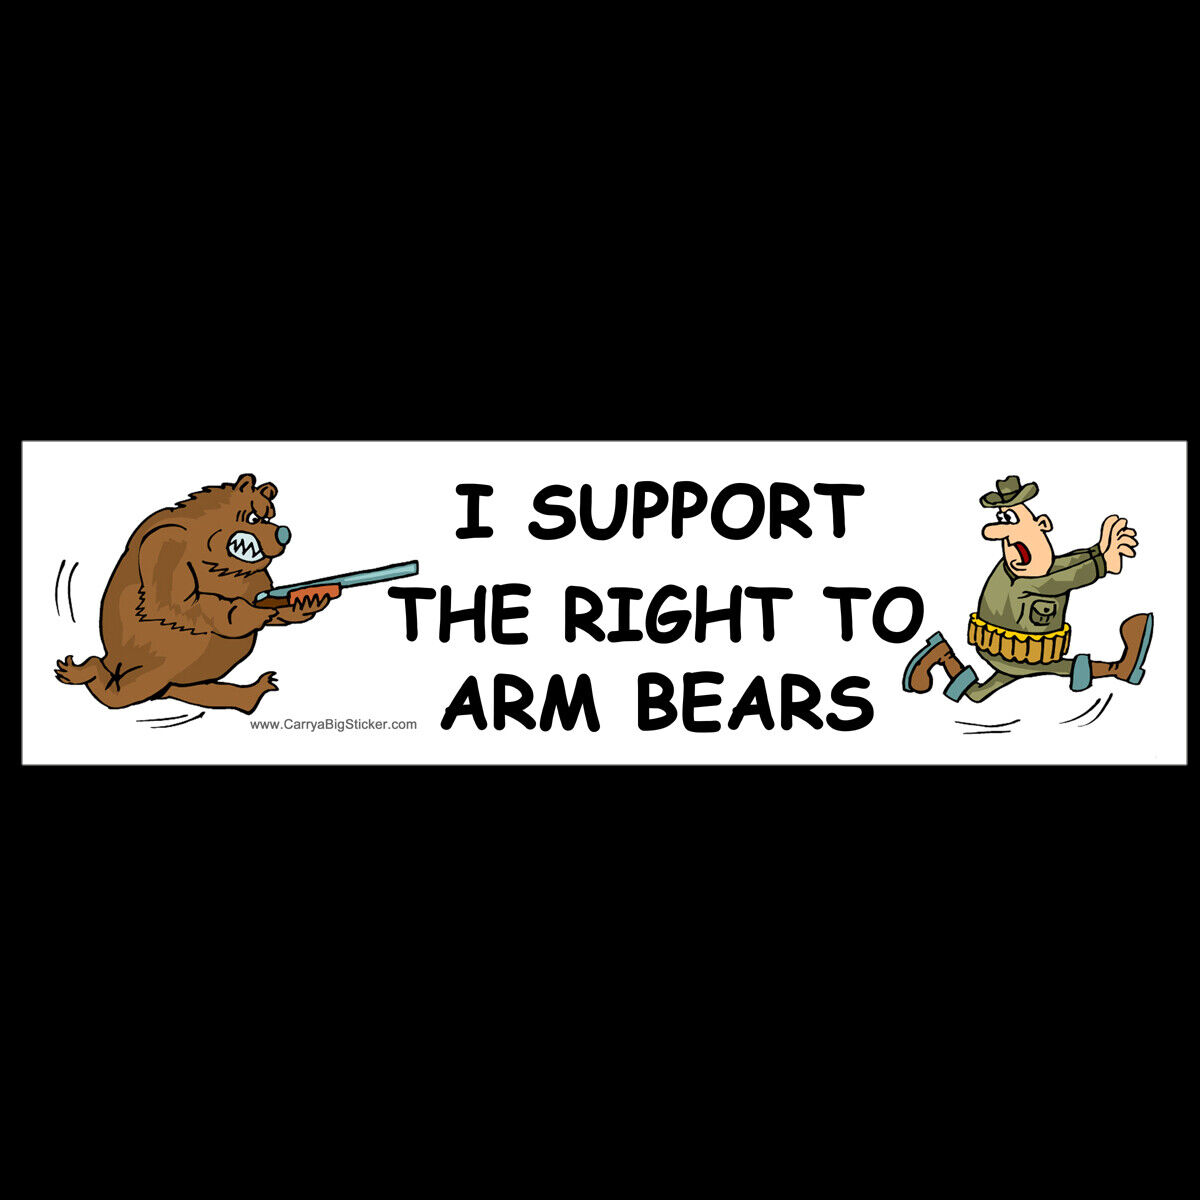 I Support the Right to Arm Bears BUMPER STICKER or MAGNET control guns anti gun 